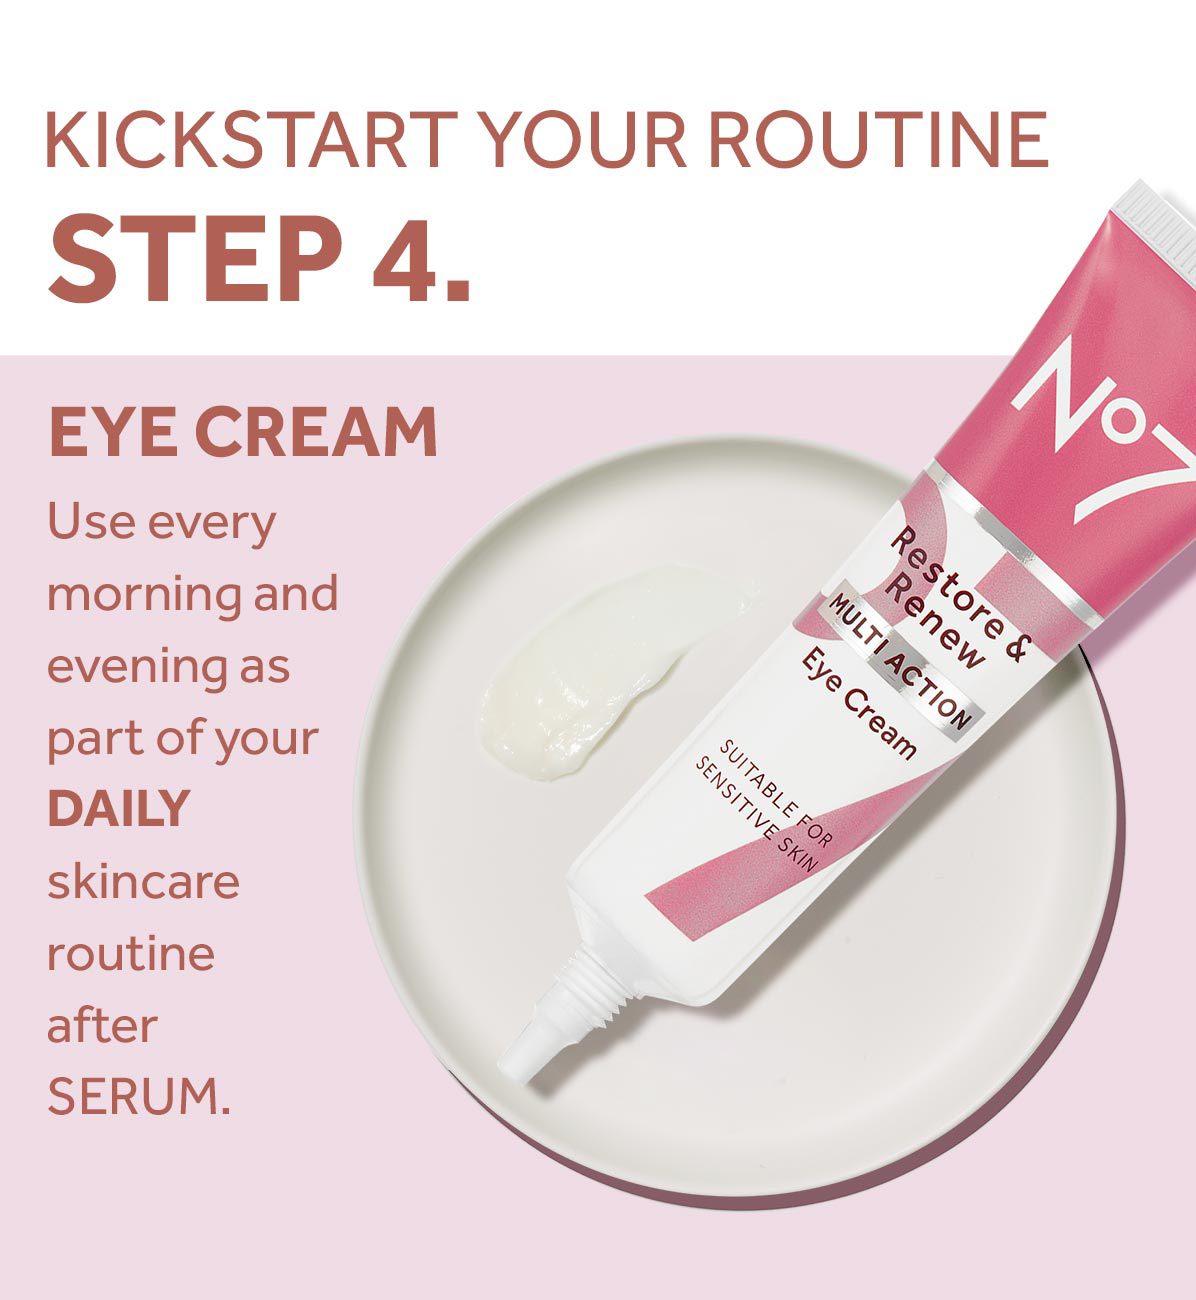 KICKSTART YOUR ROUTINESTEP 4.EYE CREAMUse every morning and evening as part of yourDAILYskincare routine afterSERUM.